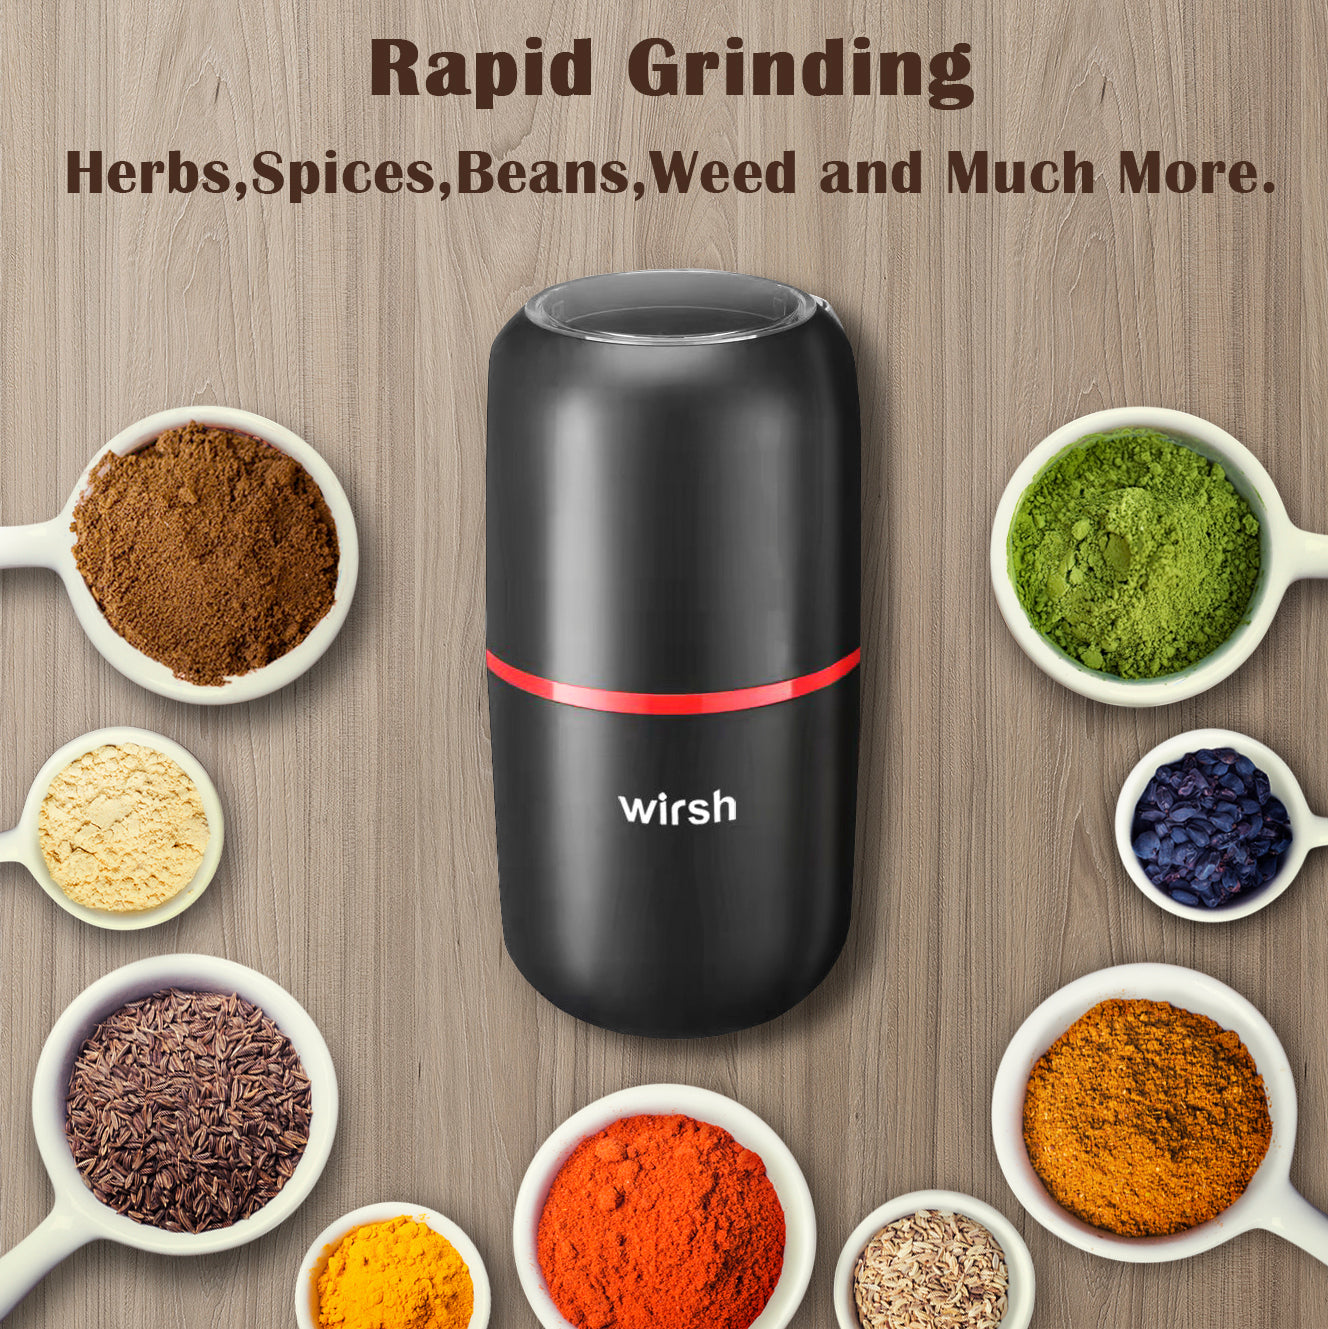 Herb Grinder-Wirsh Electric Spice Grinder with 5.3oz. Stainless Steel  Removable Bowl,Coffee Grinder with 200W Motor for Herbs,Spices,Coffee